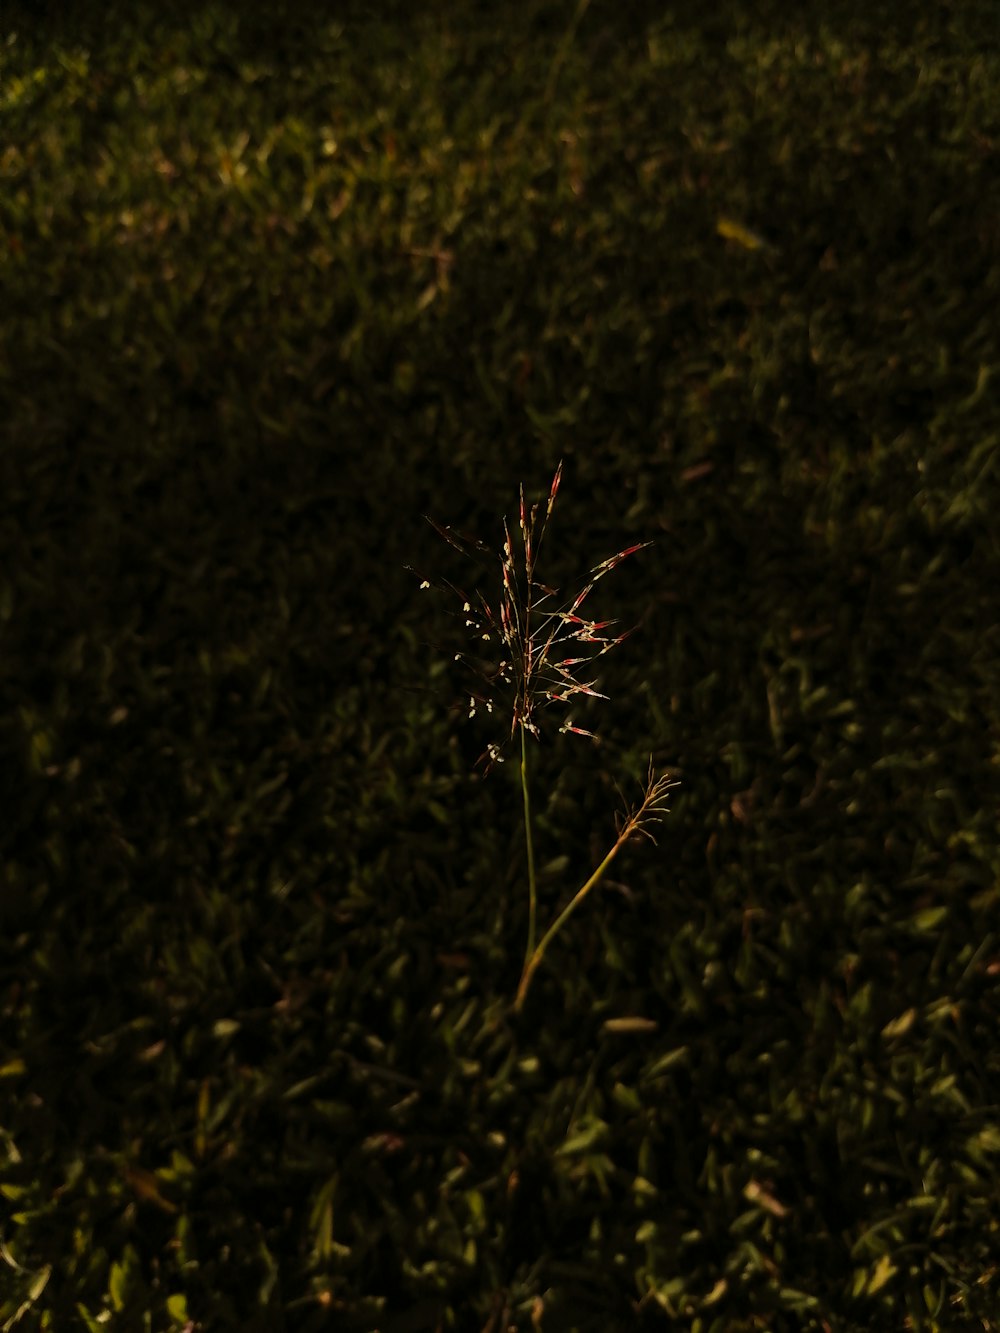 a single flower in the middle of a grassy field